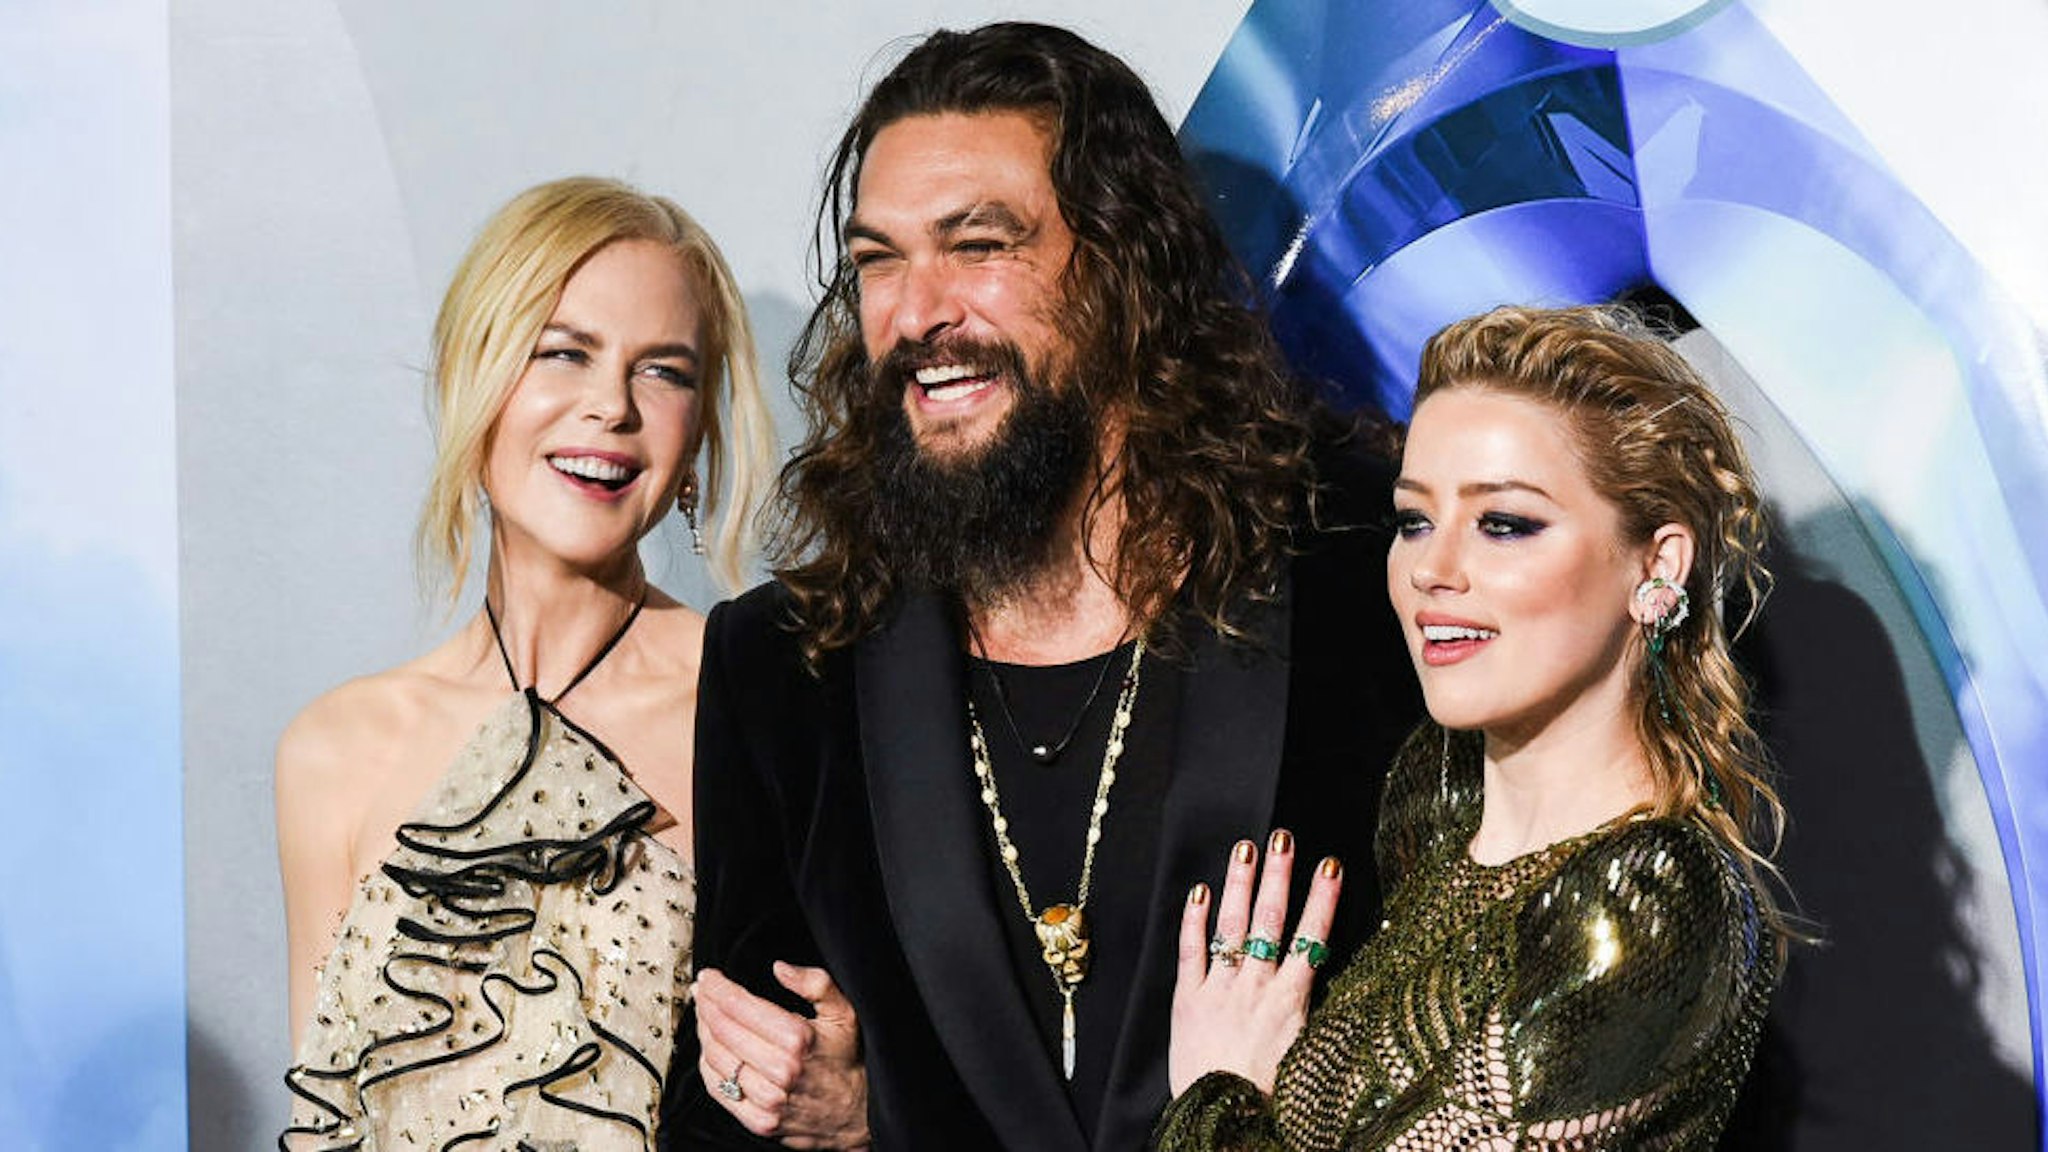 Nicole Kidman, Jason Momoa and Amber Heard attend the premiere of Warner Bros. Pictures' "Aquaman" at TCL Chinese Theatre on December 12, 2018 in Hollywood, California. (Photo by Presley Ann/FilmMagic)